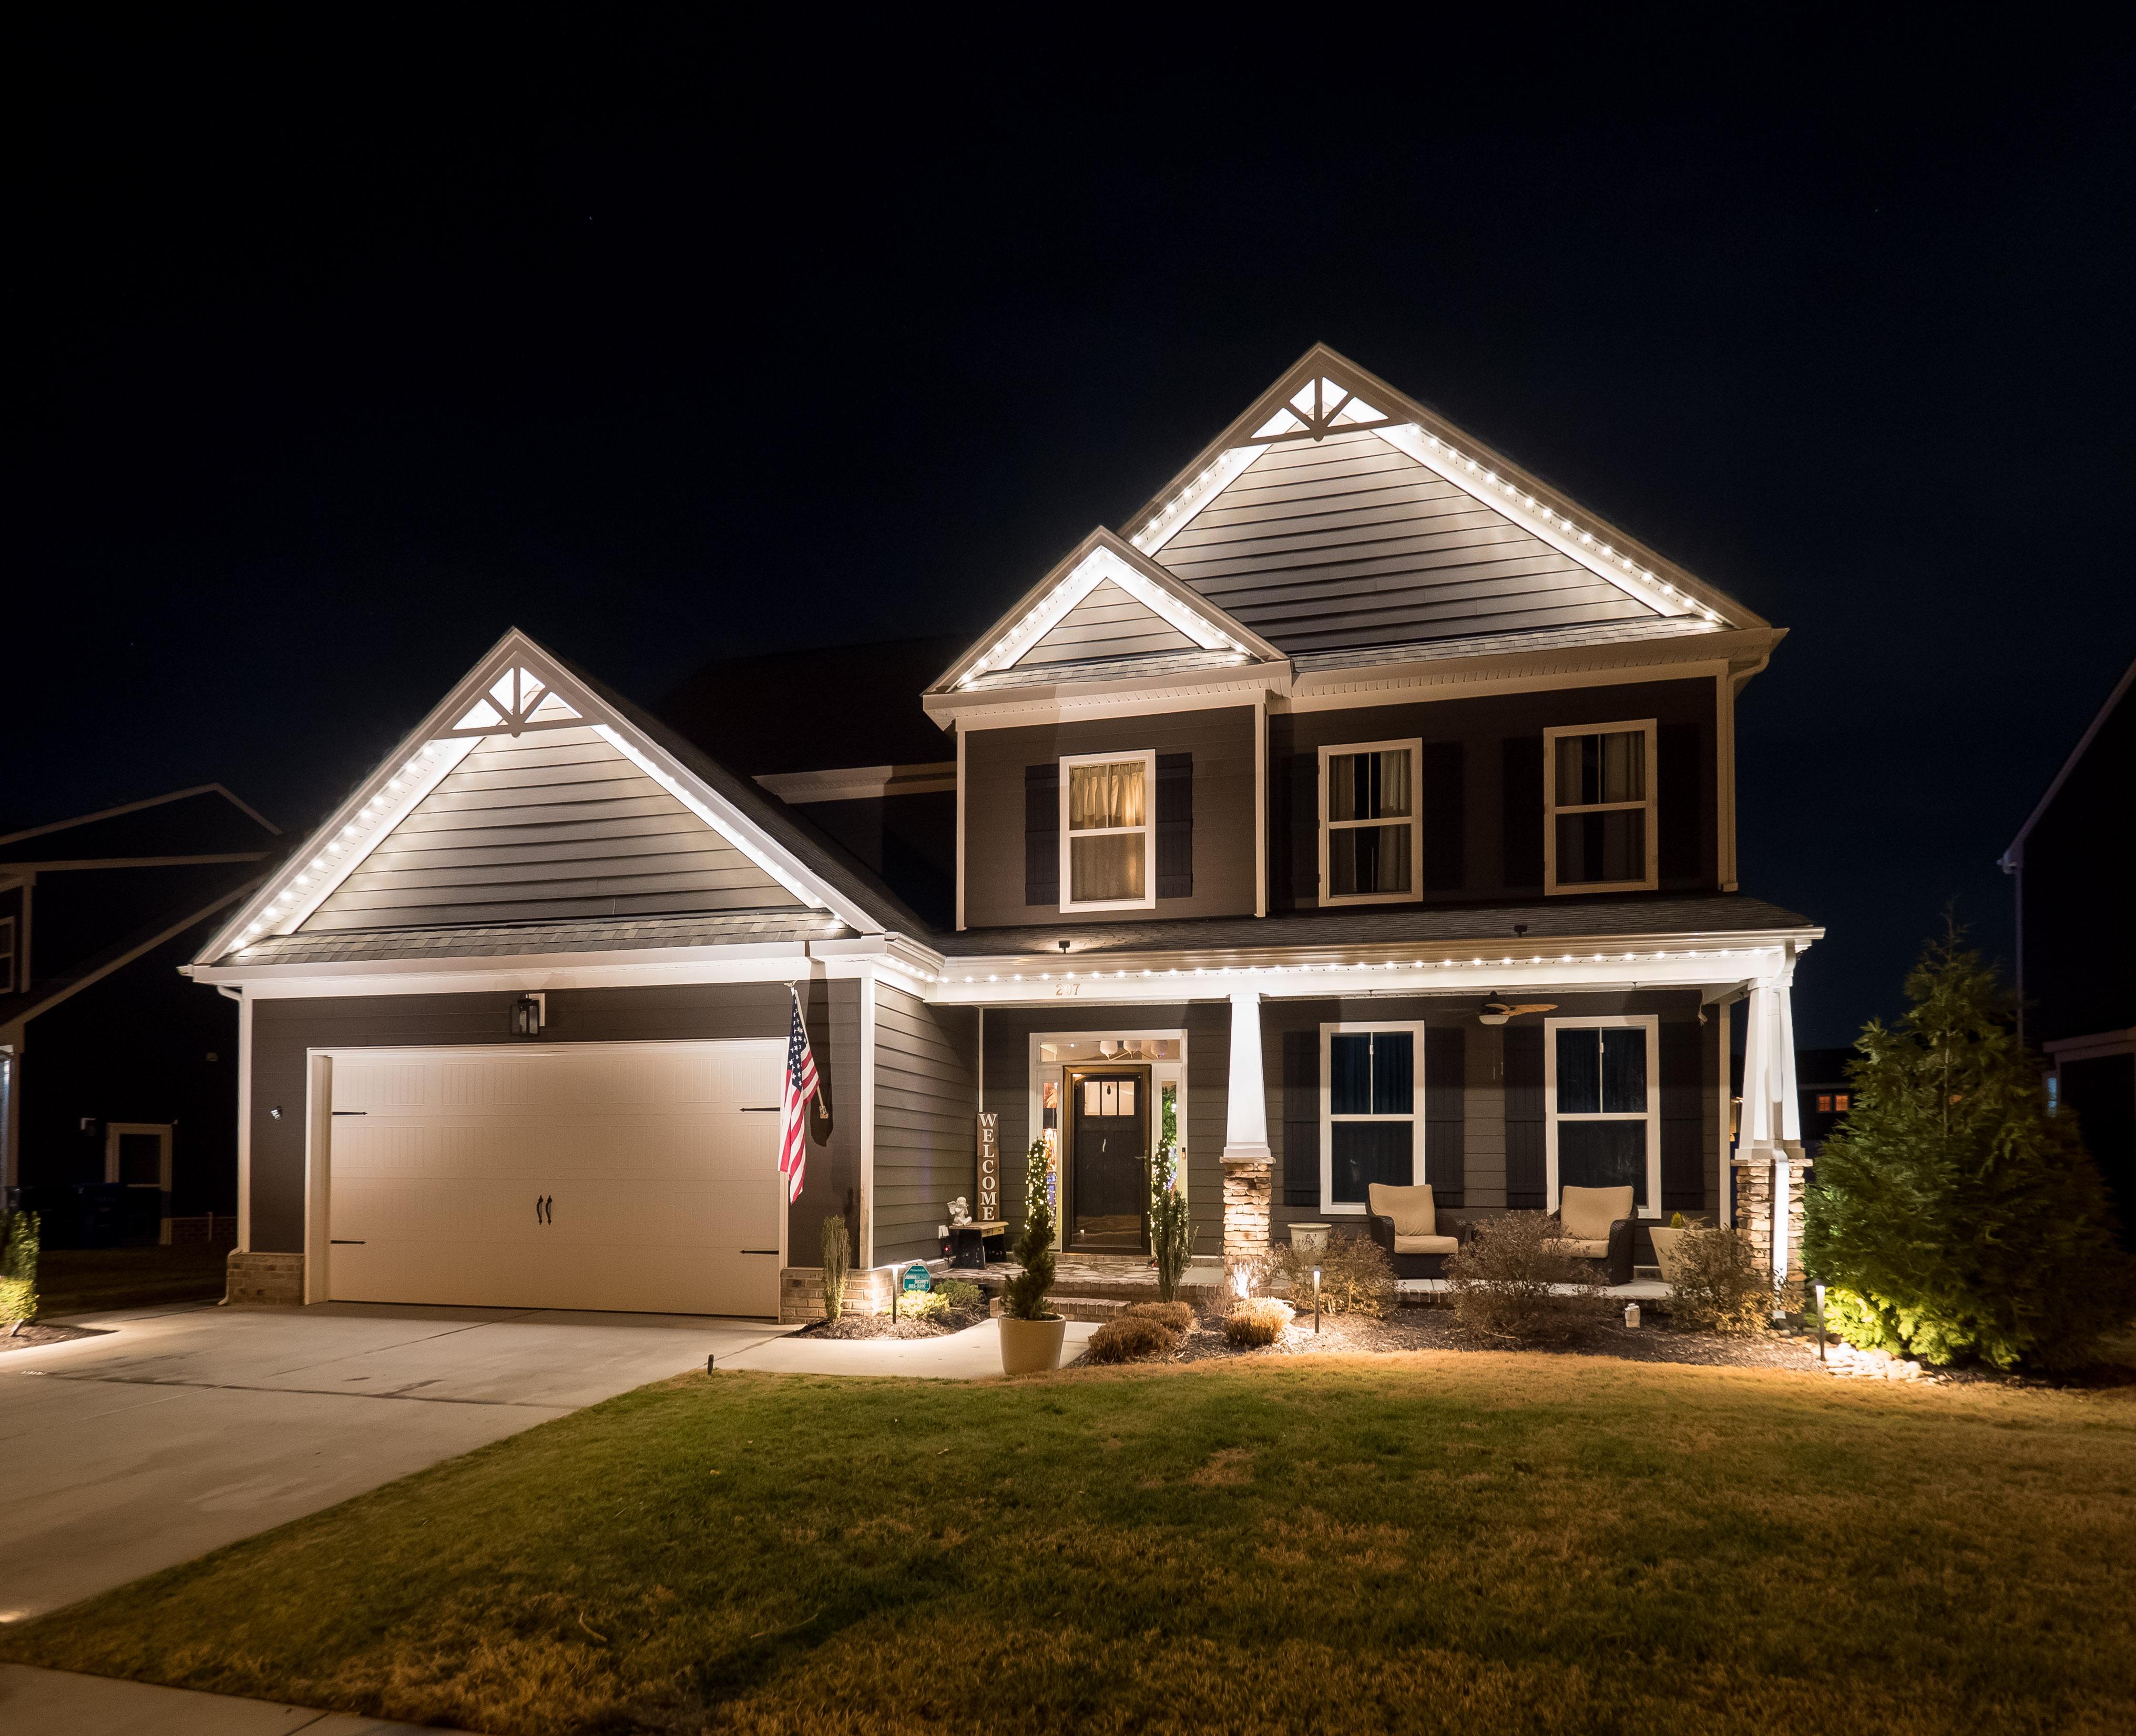 Transform Your Home with Exterior Soffit Lighting Design from Outdoor ...